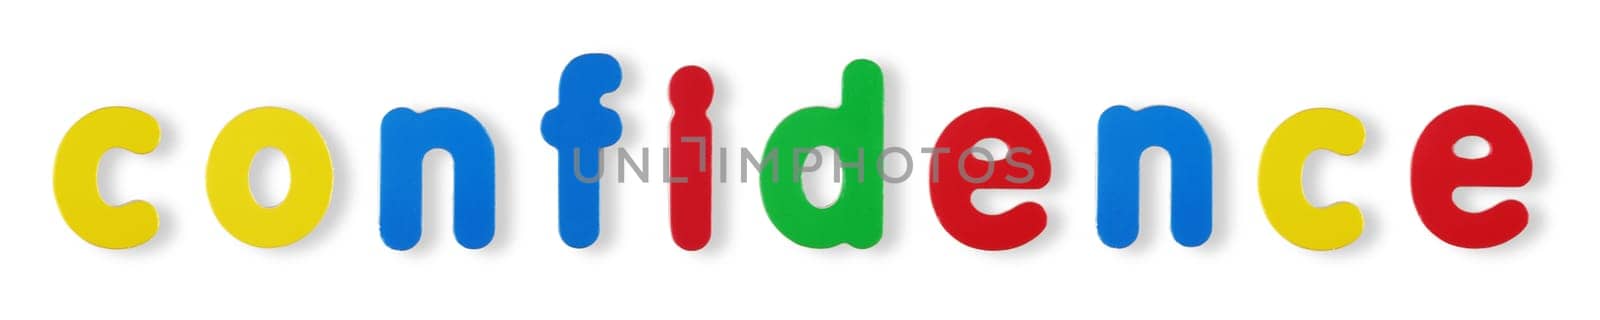 confidence word coloured magnetic letters with clipping path by VivacityImages